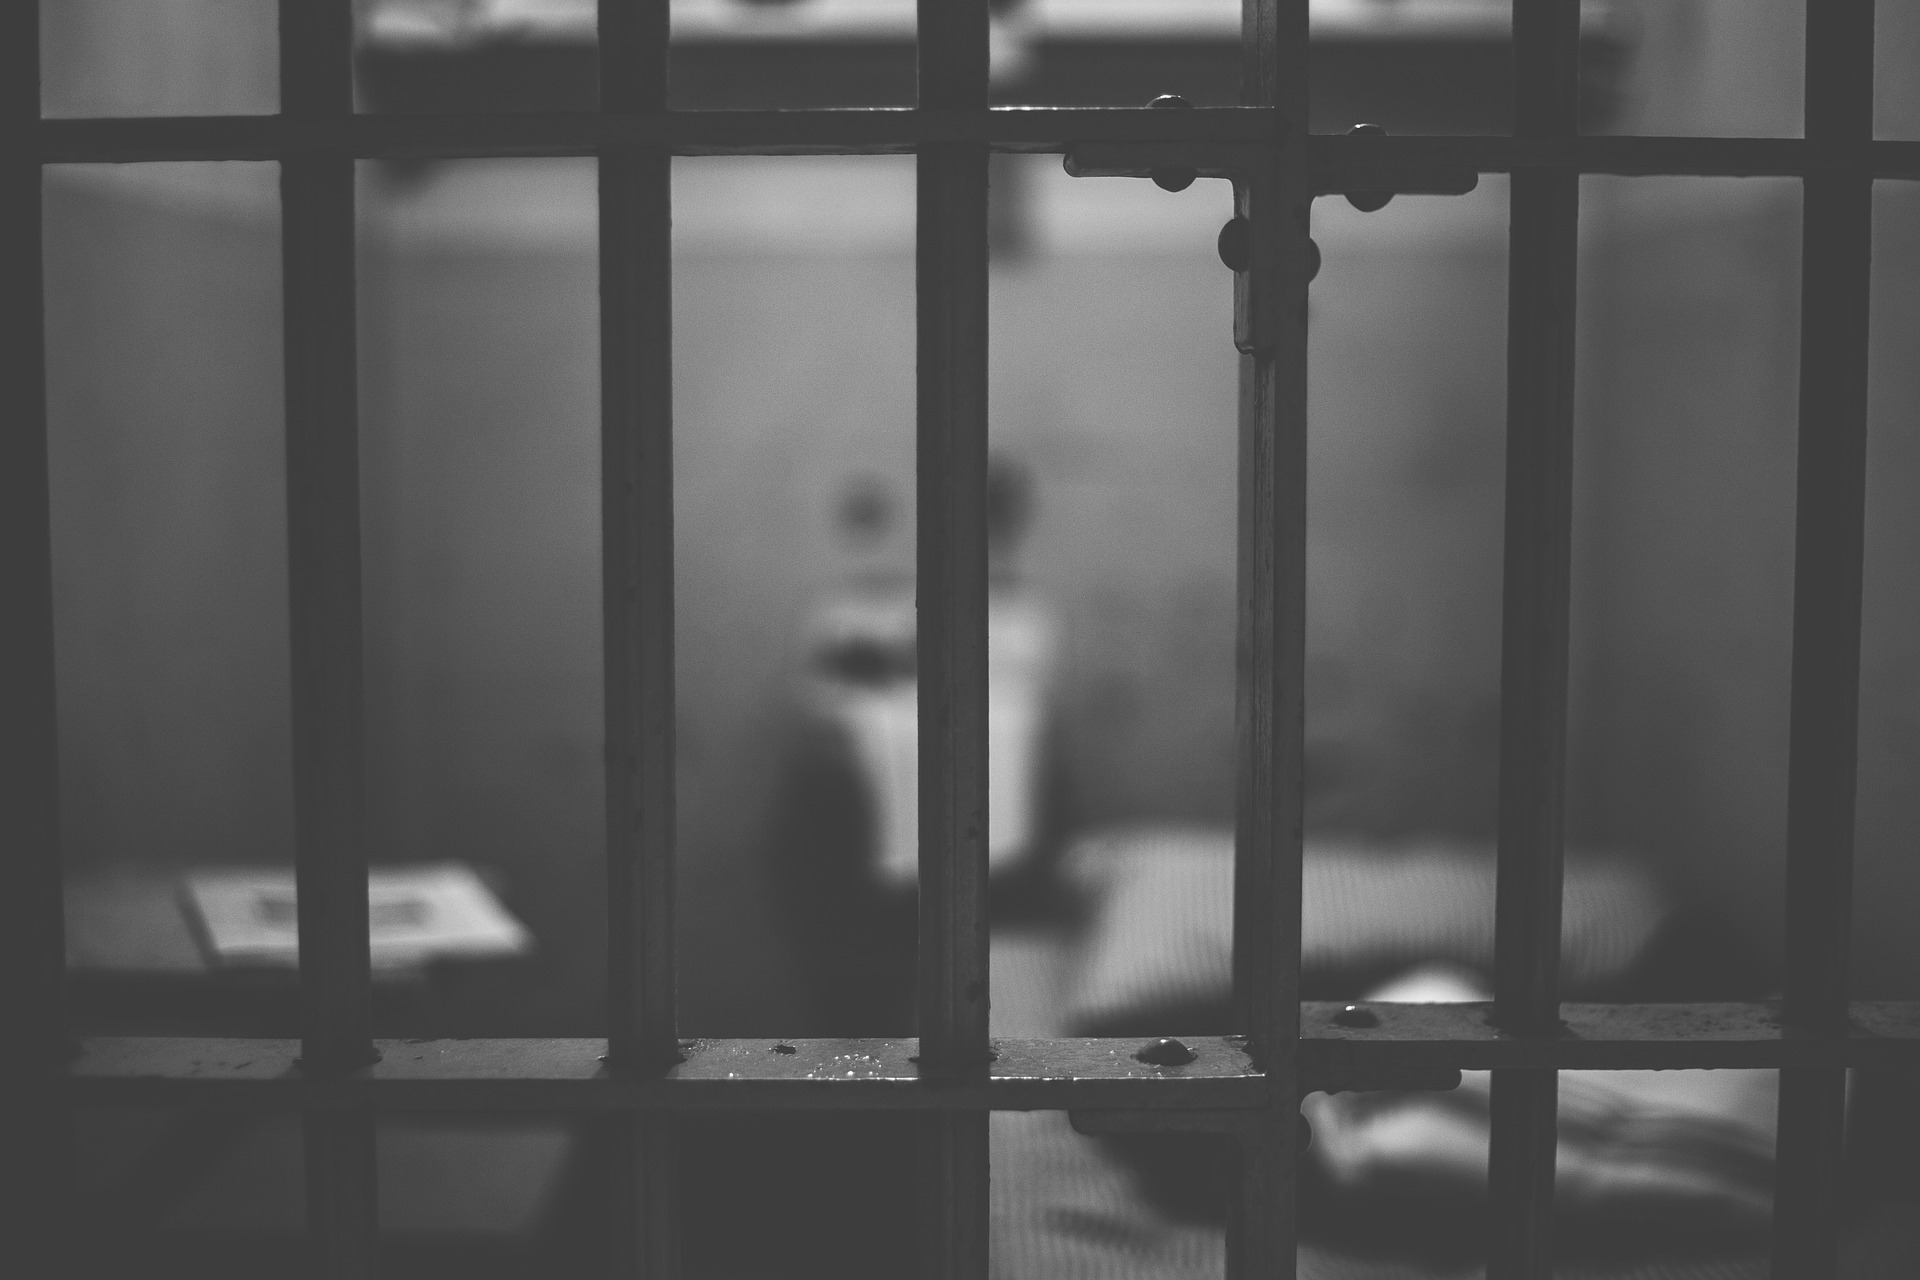 New guidelines expected to increase prison sentence lengths for gross negligence manslaughter